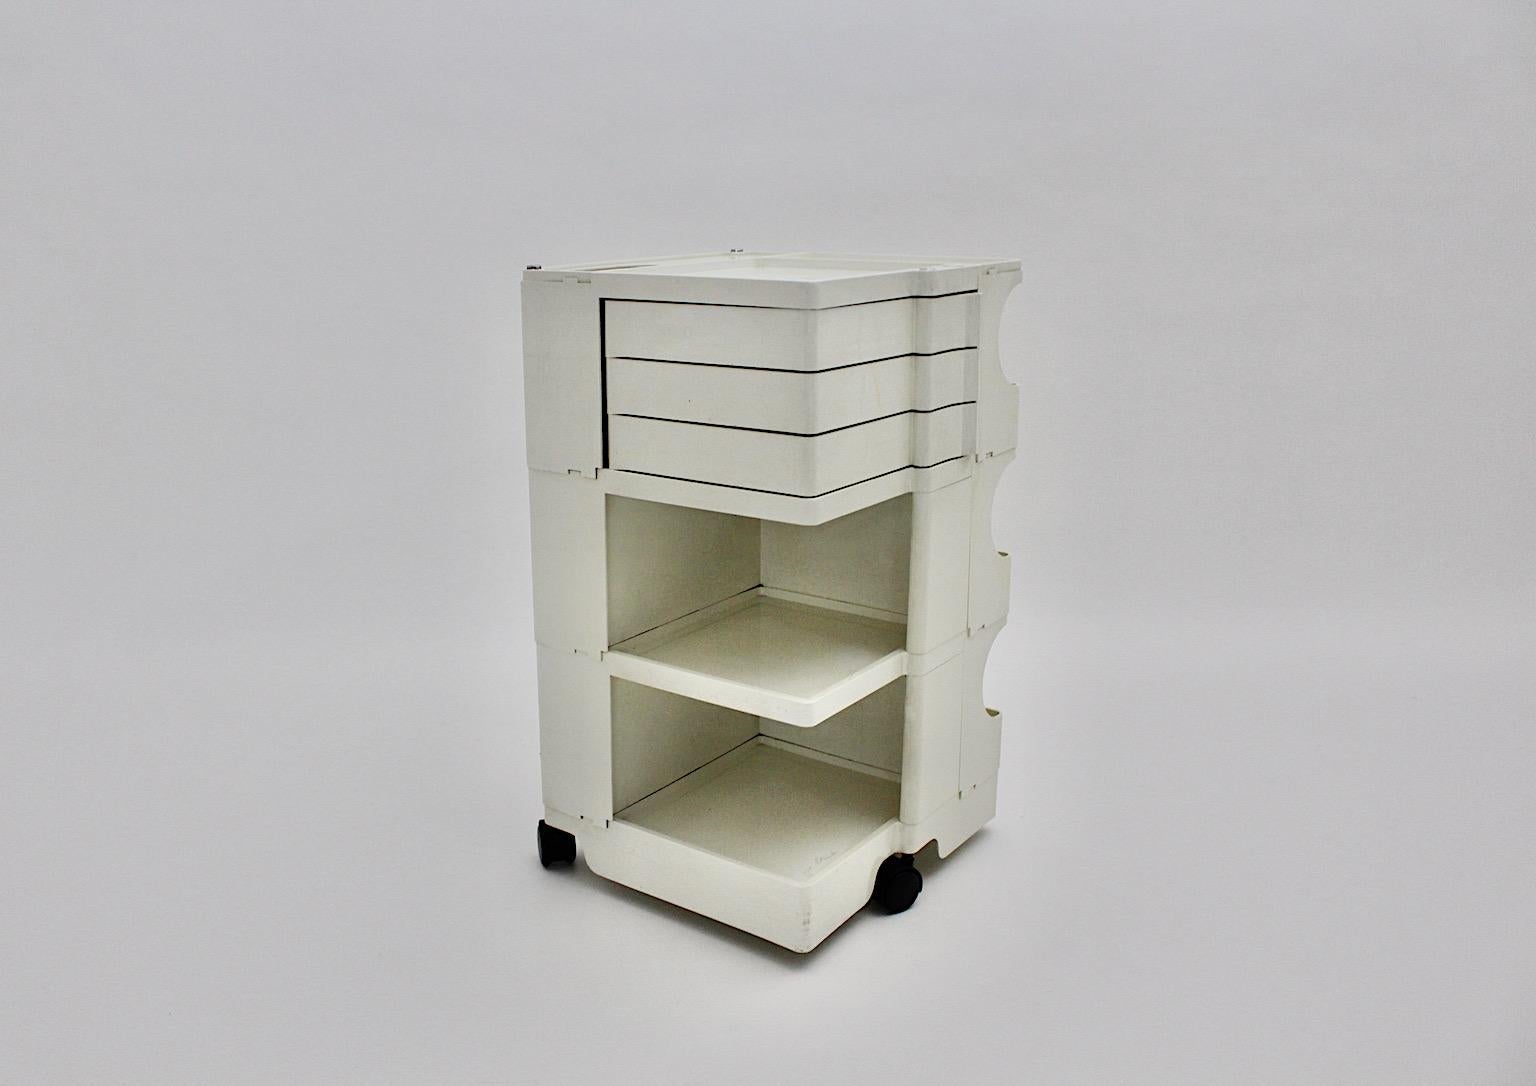 Space Age White Plastic Vintage Storage Trolley Container Joe Colombo 1970 Italy For Sale 9